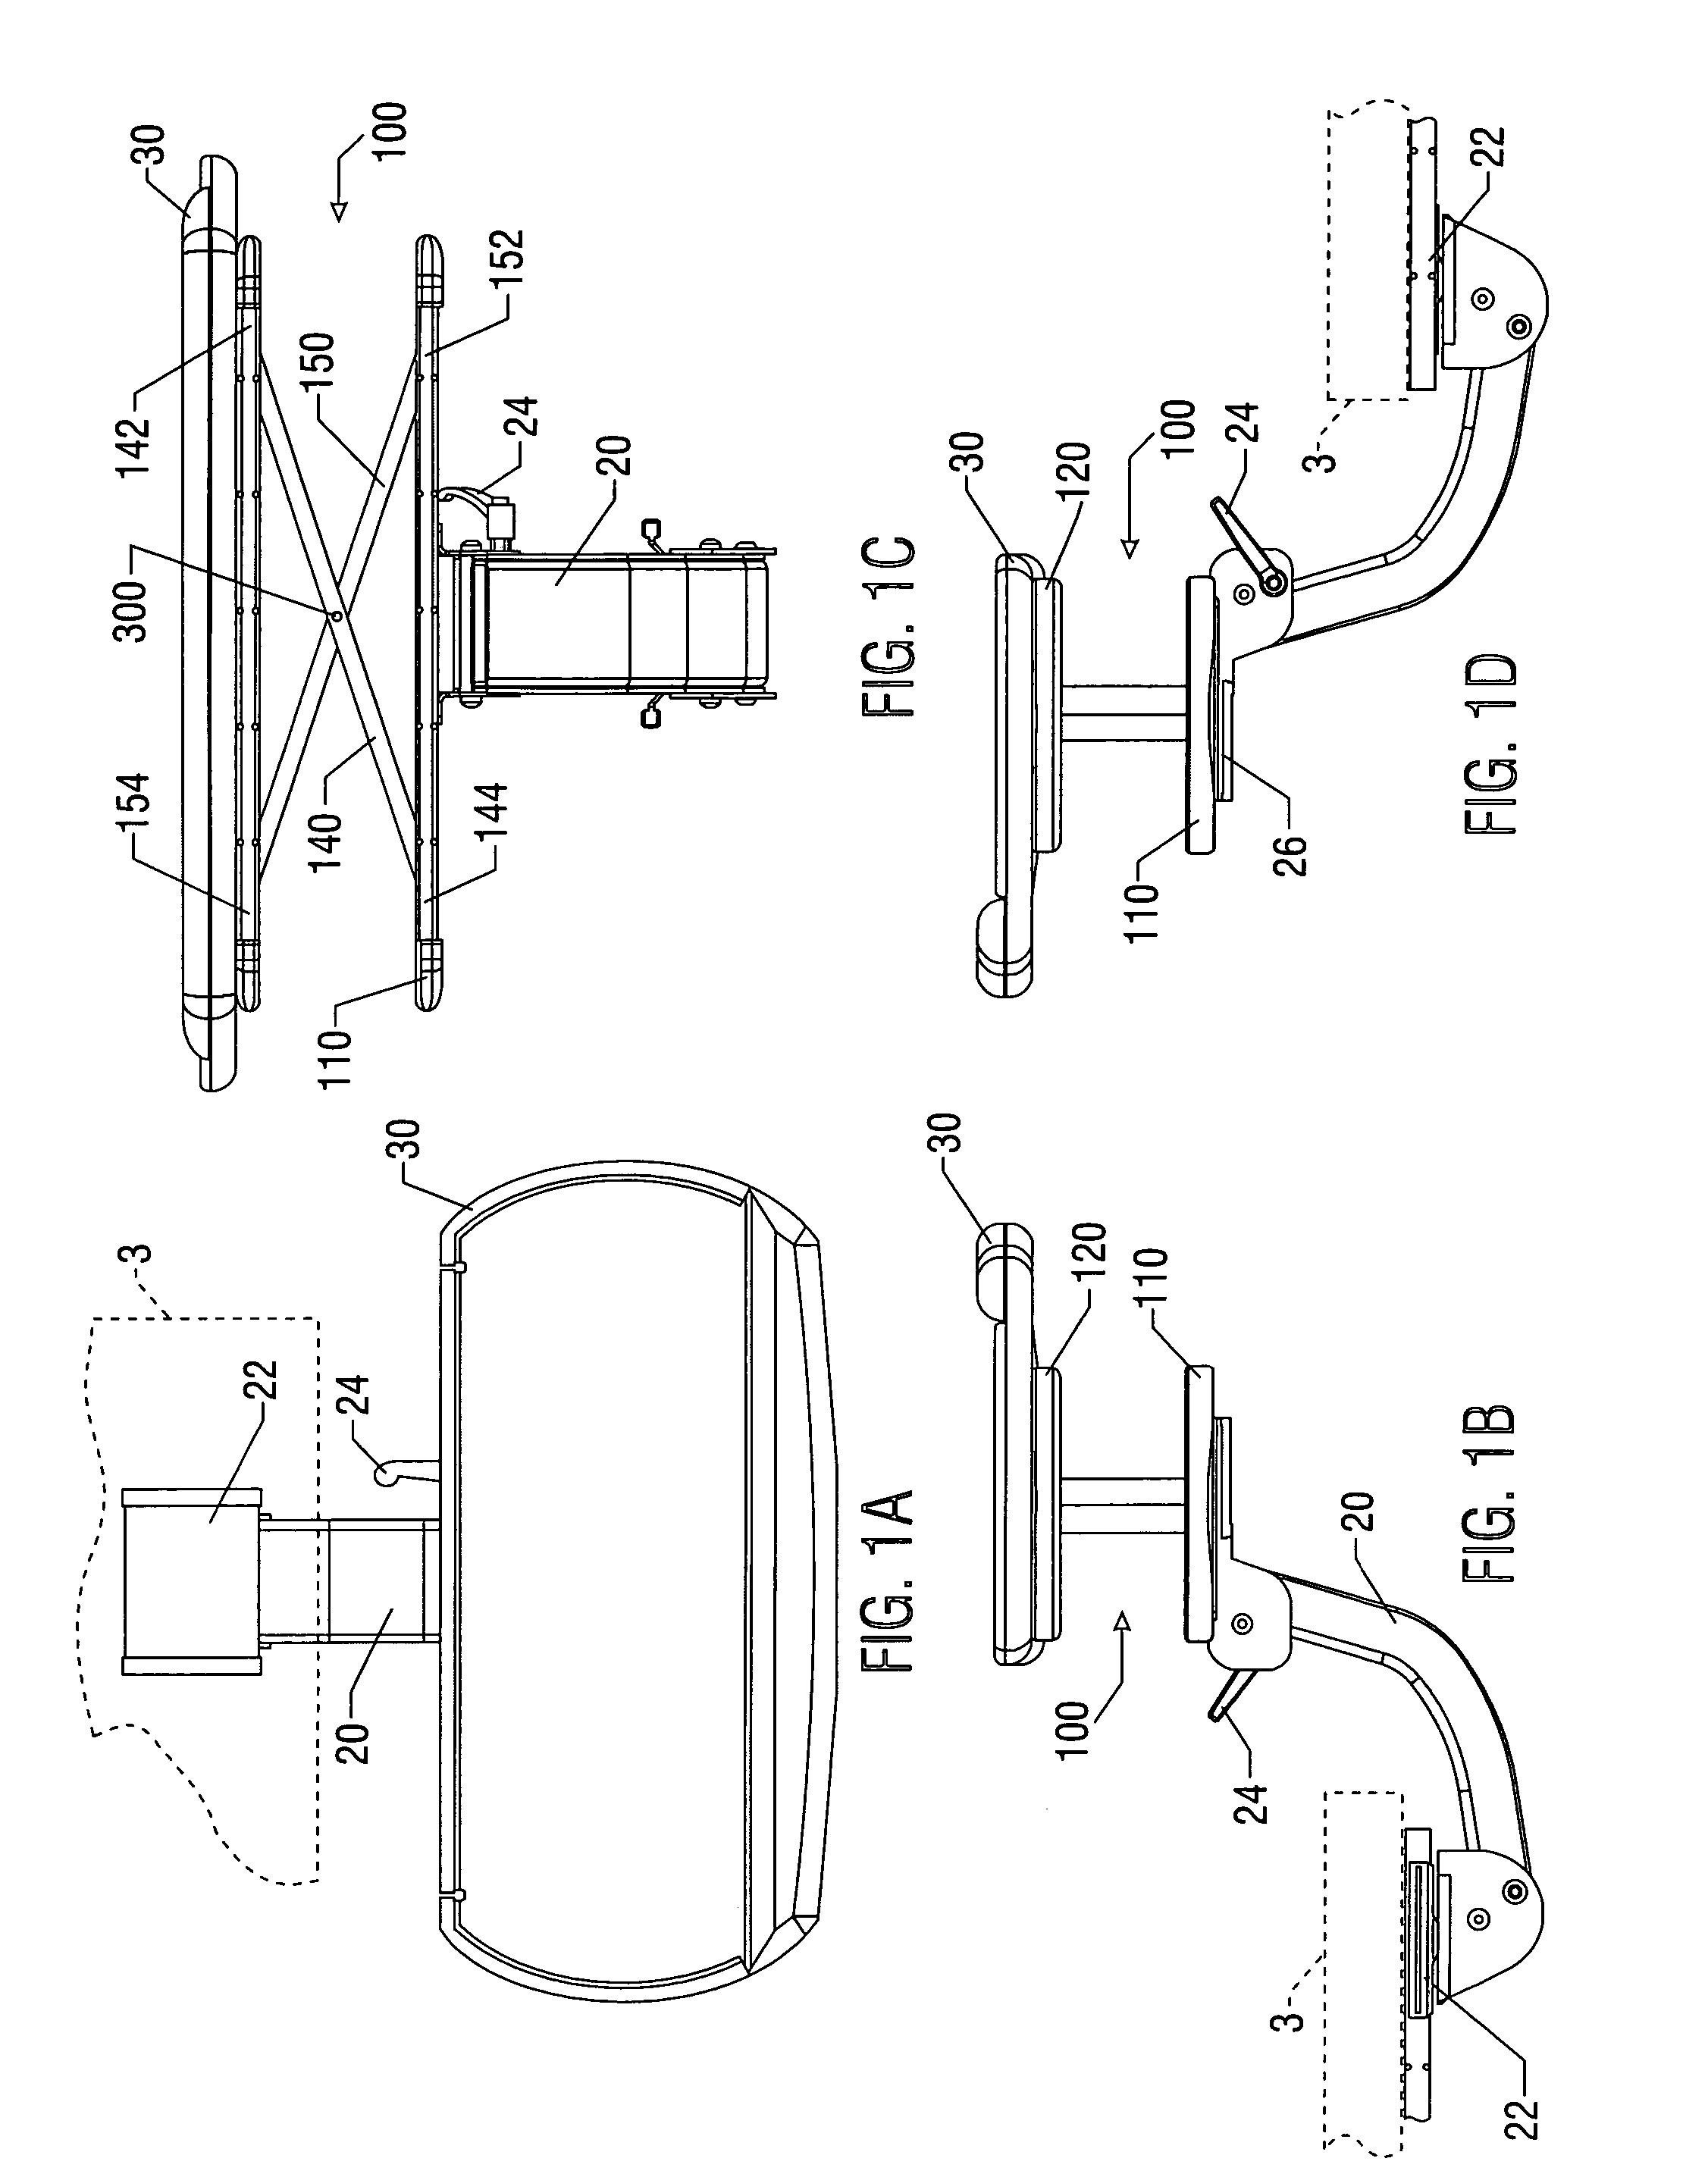 Vertical adjustment apparatus for a keyboard